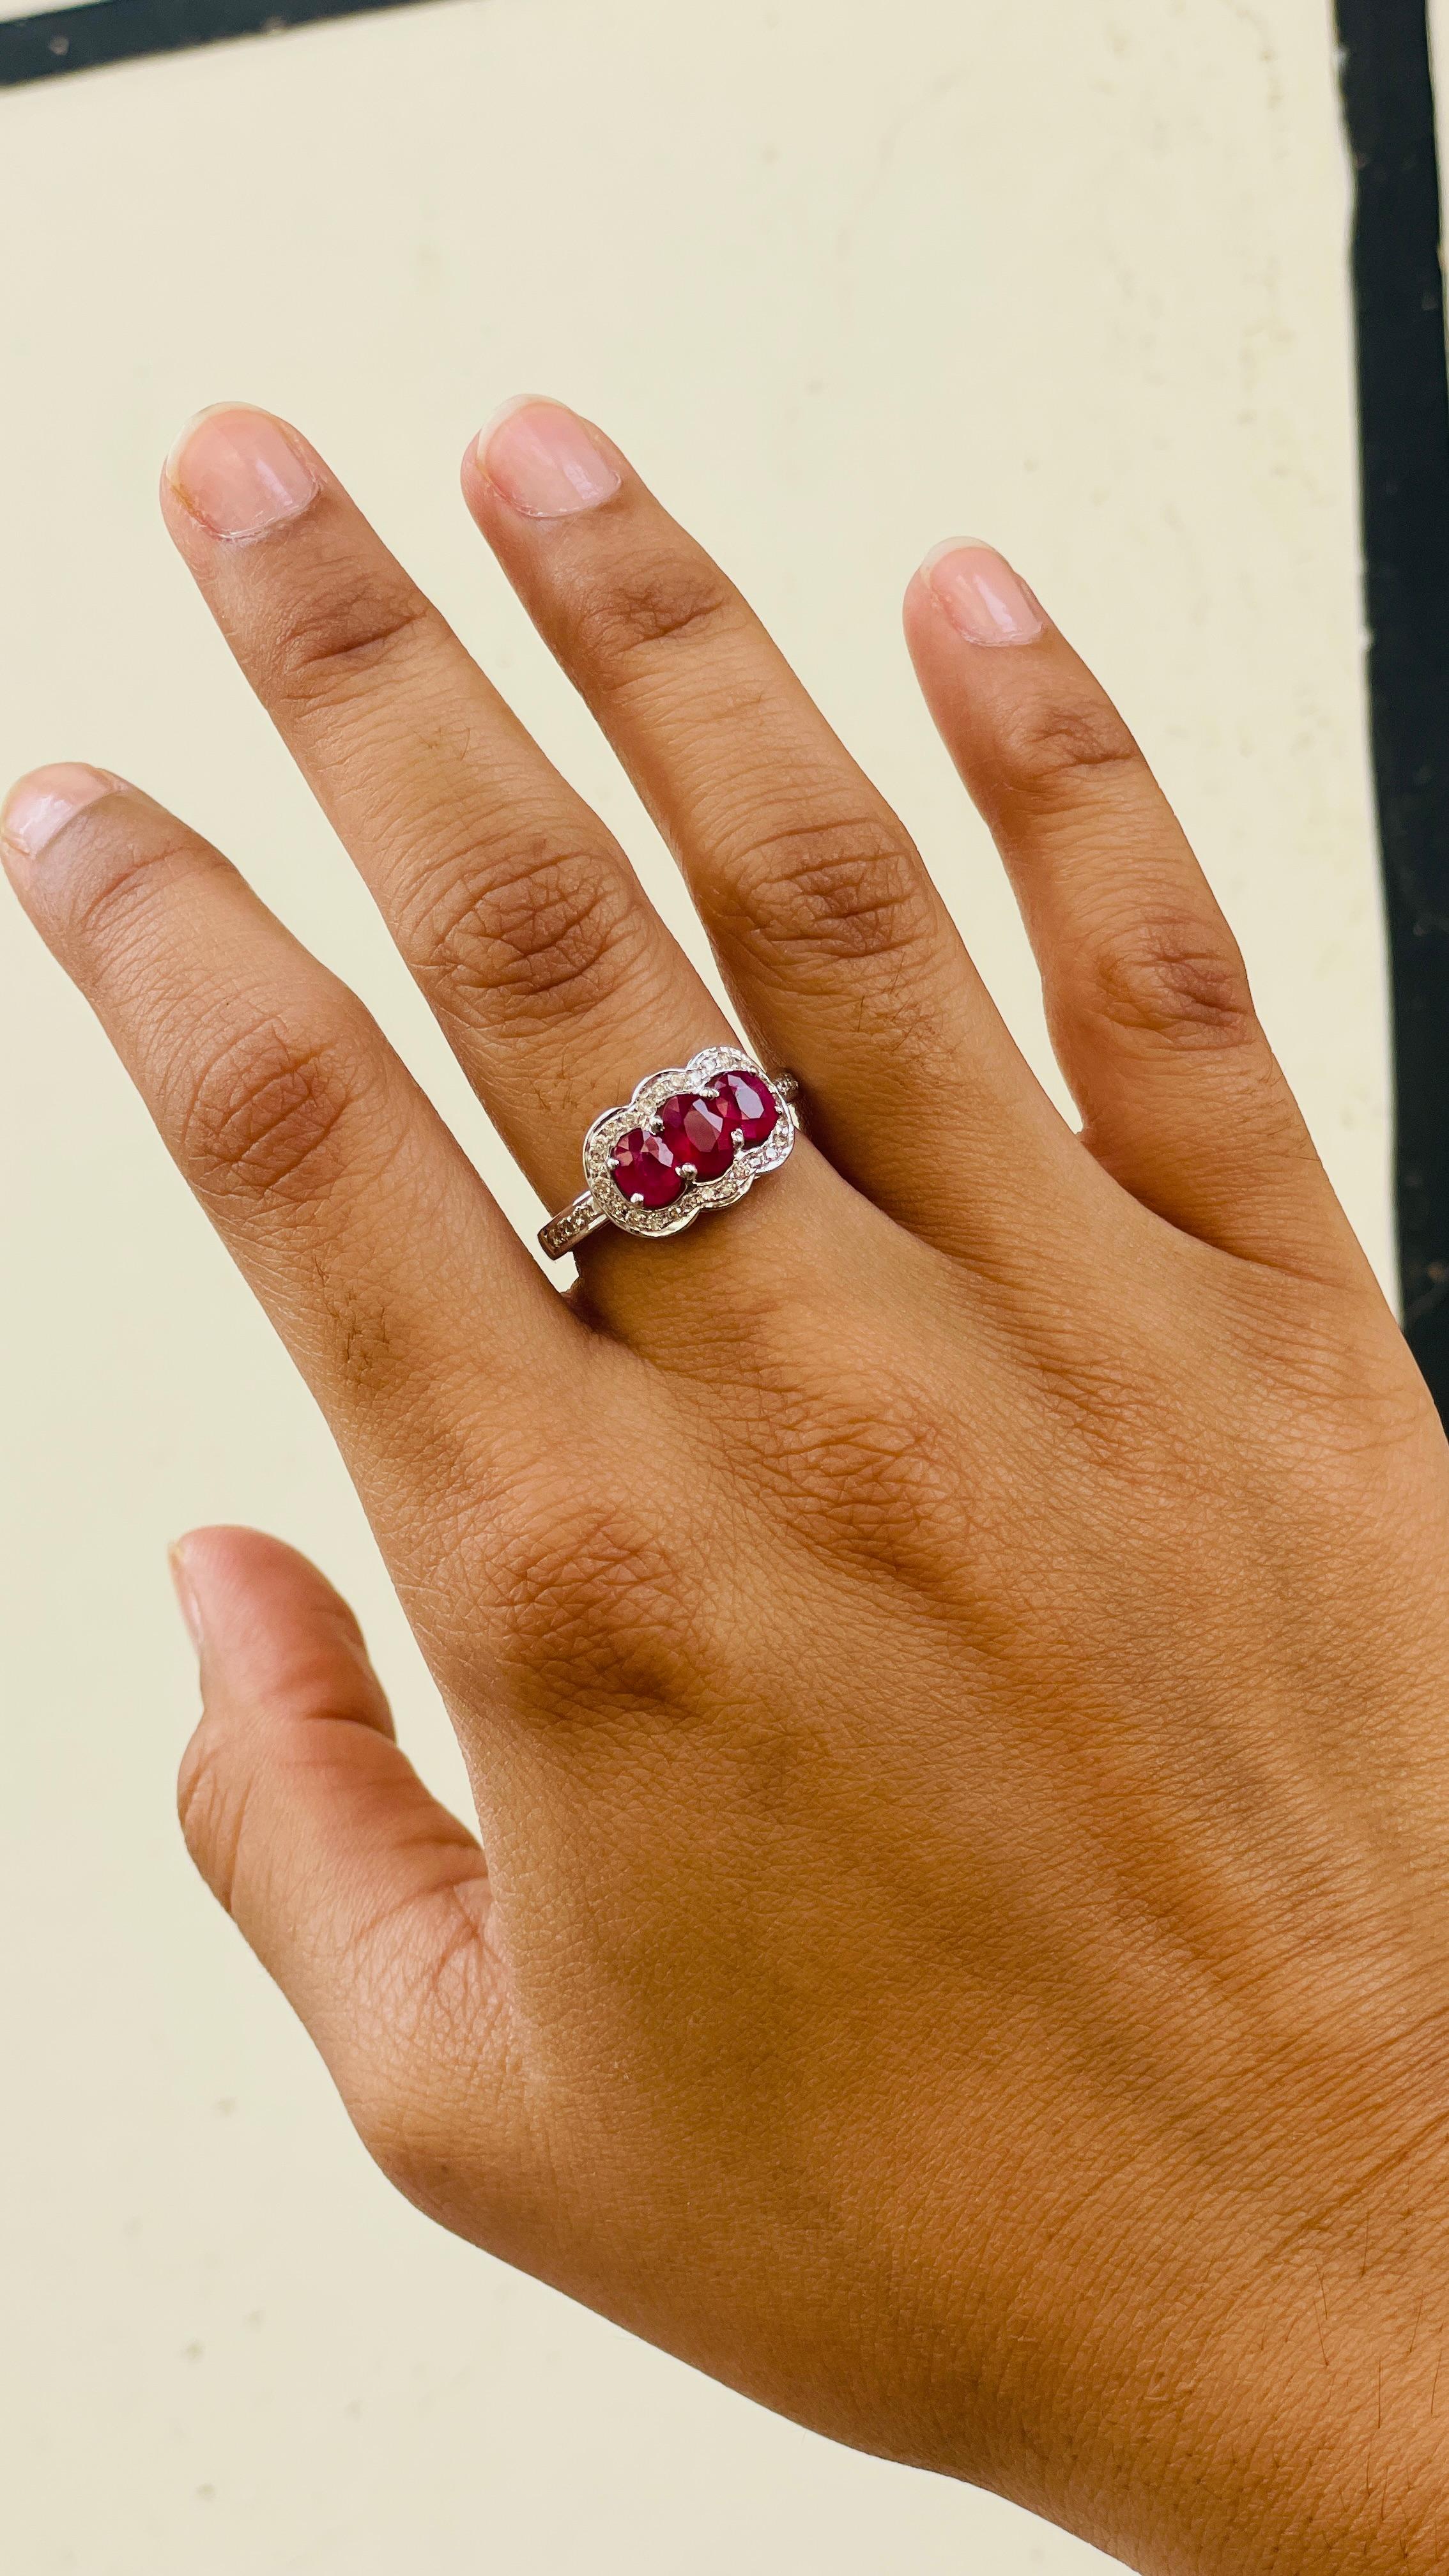 For Sale:  Oval Cut Three Stone Ruby Engagement Ring in 18K White Gold with Diamonds 8